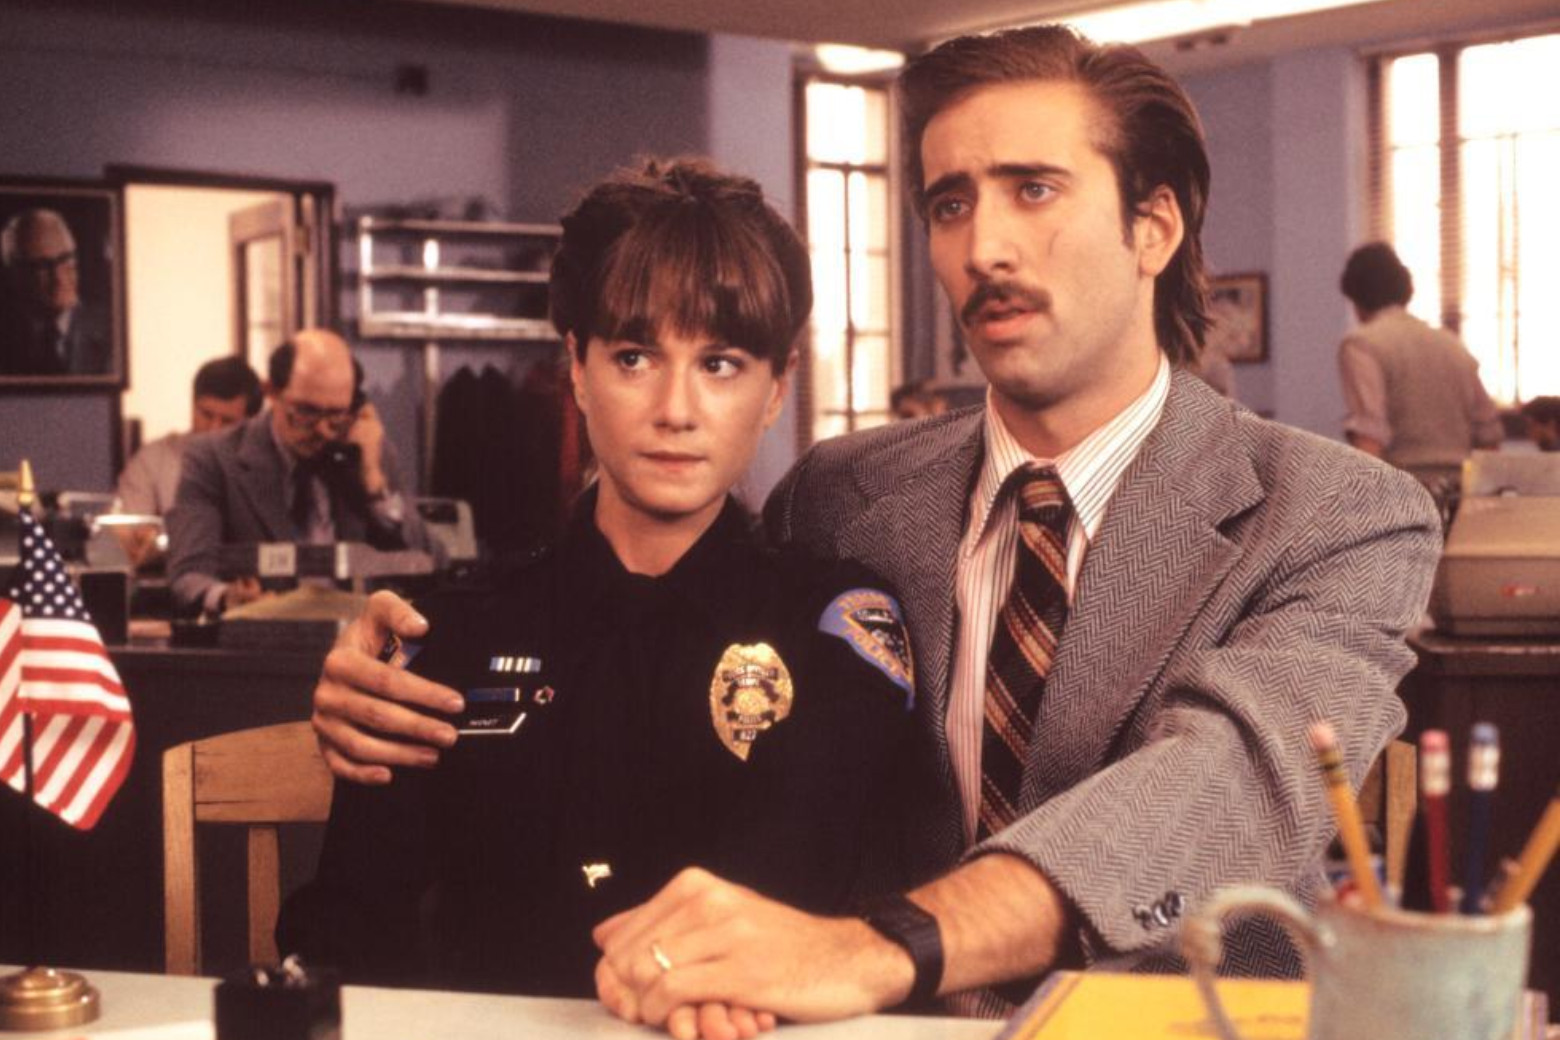 Holly Hunter and Nicolas Cage in 80s clothing